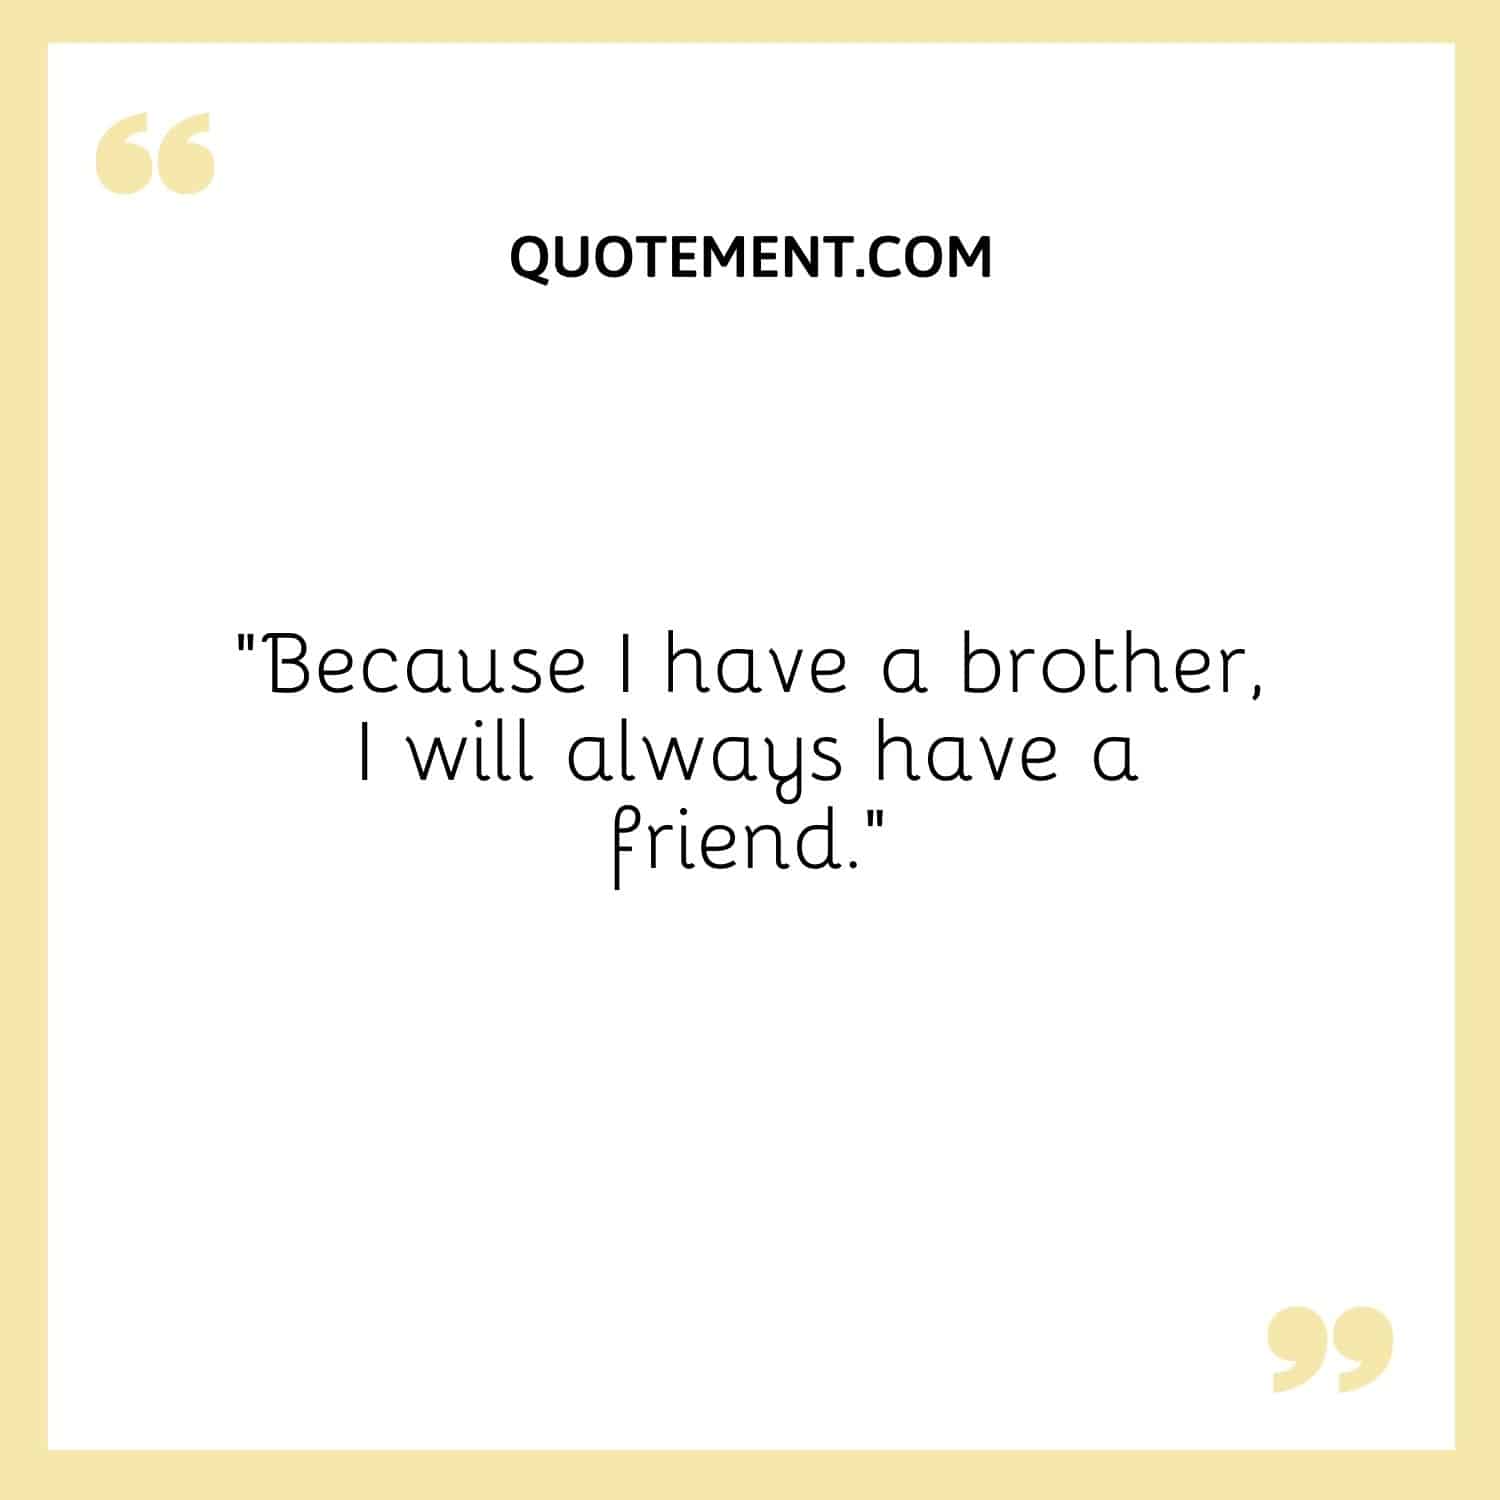 Because I have a brother, I'll always have a friend.